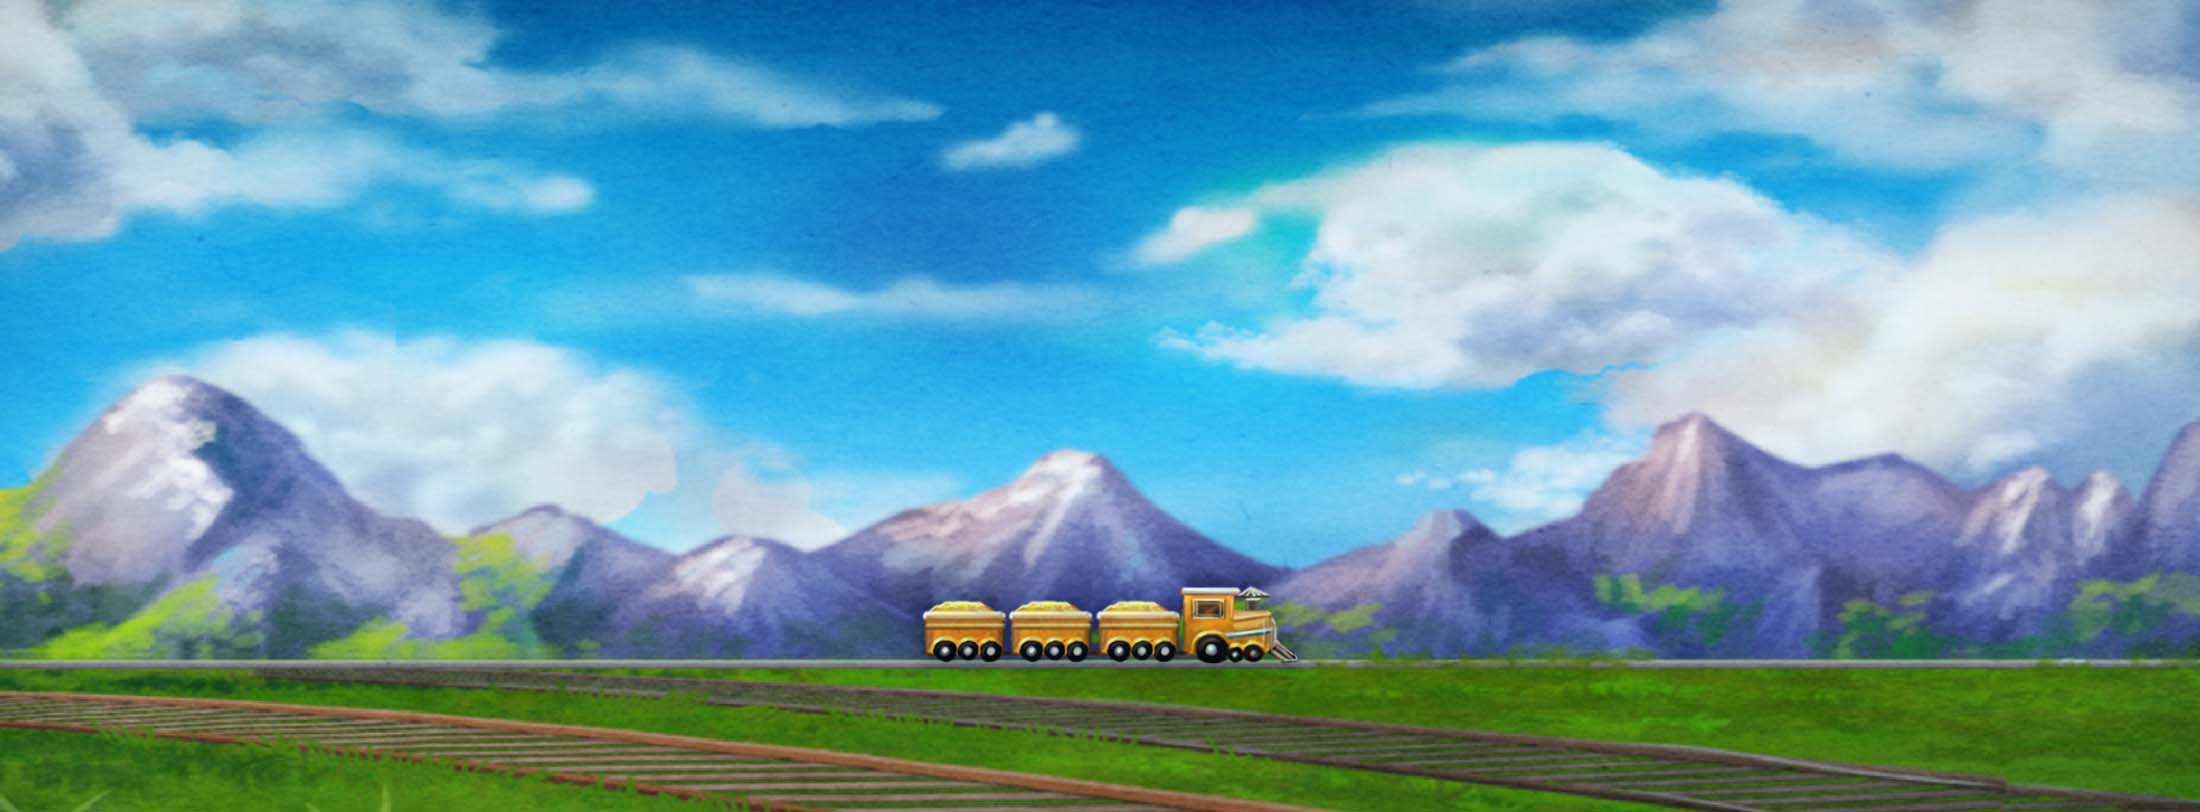 Train Conductor 2: USA banner background